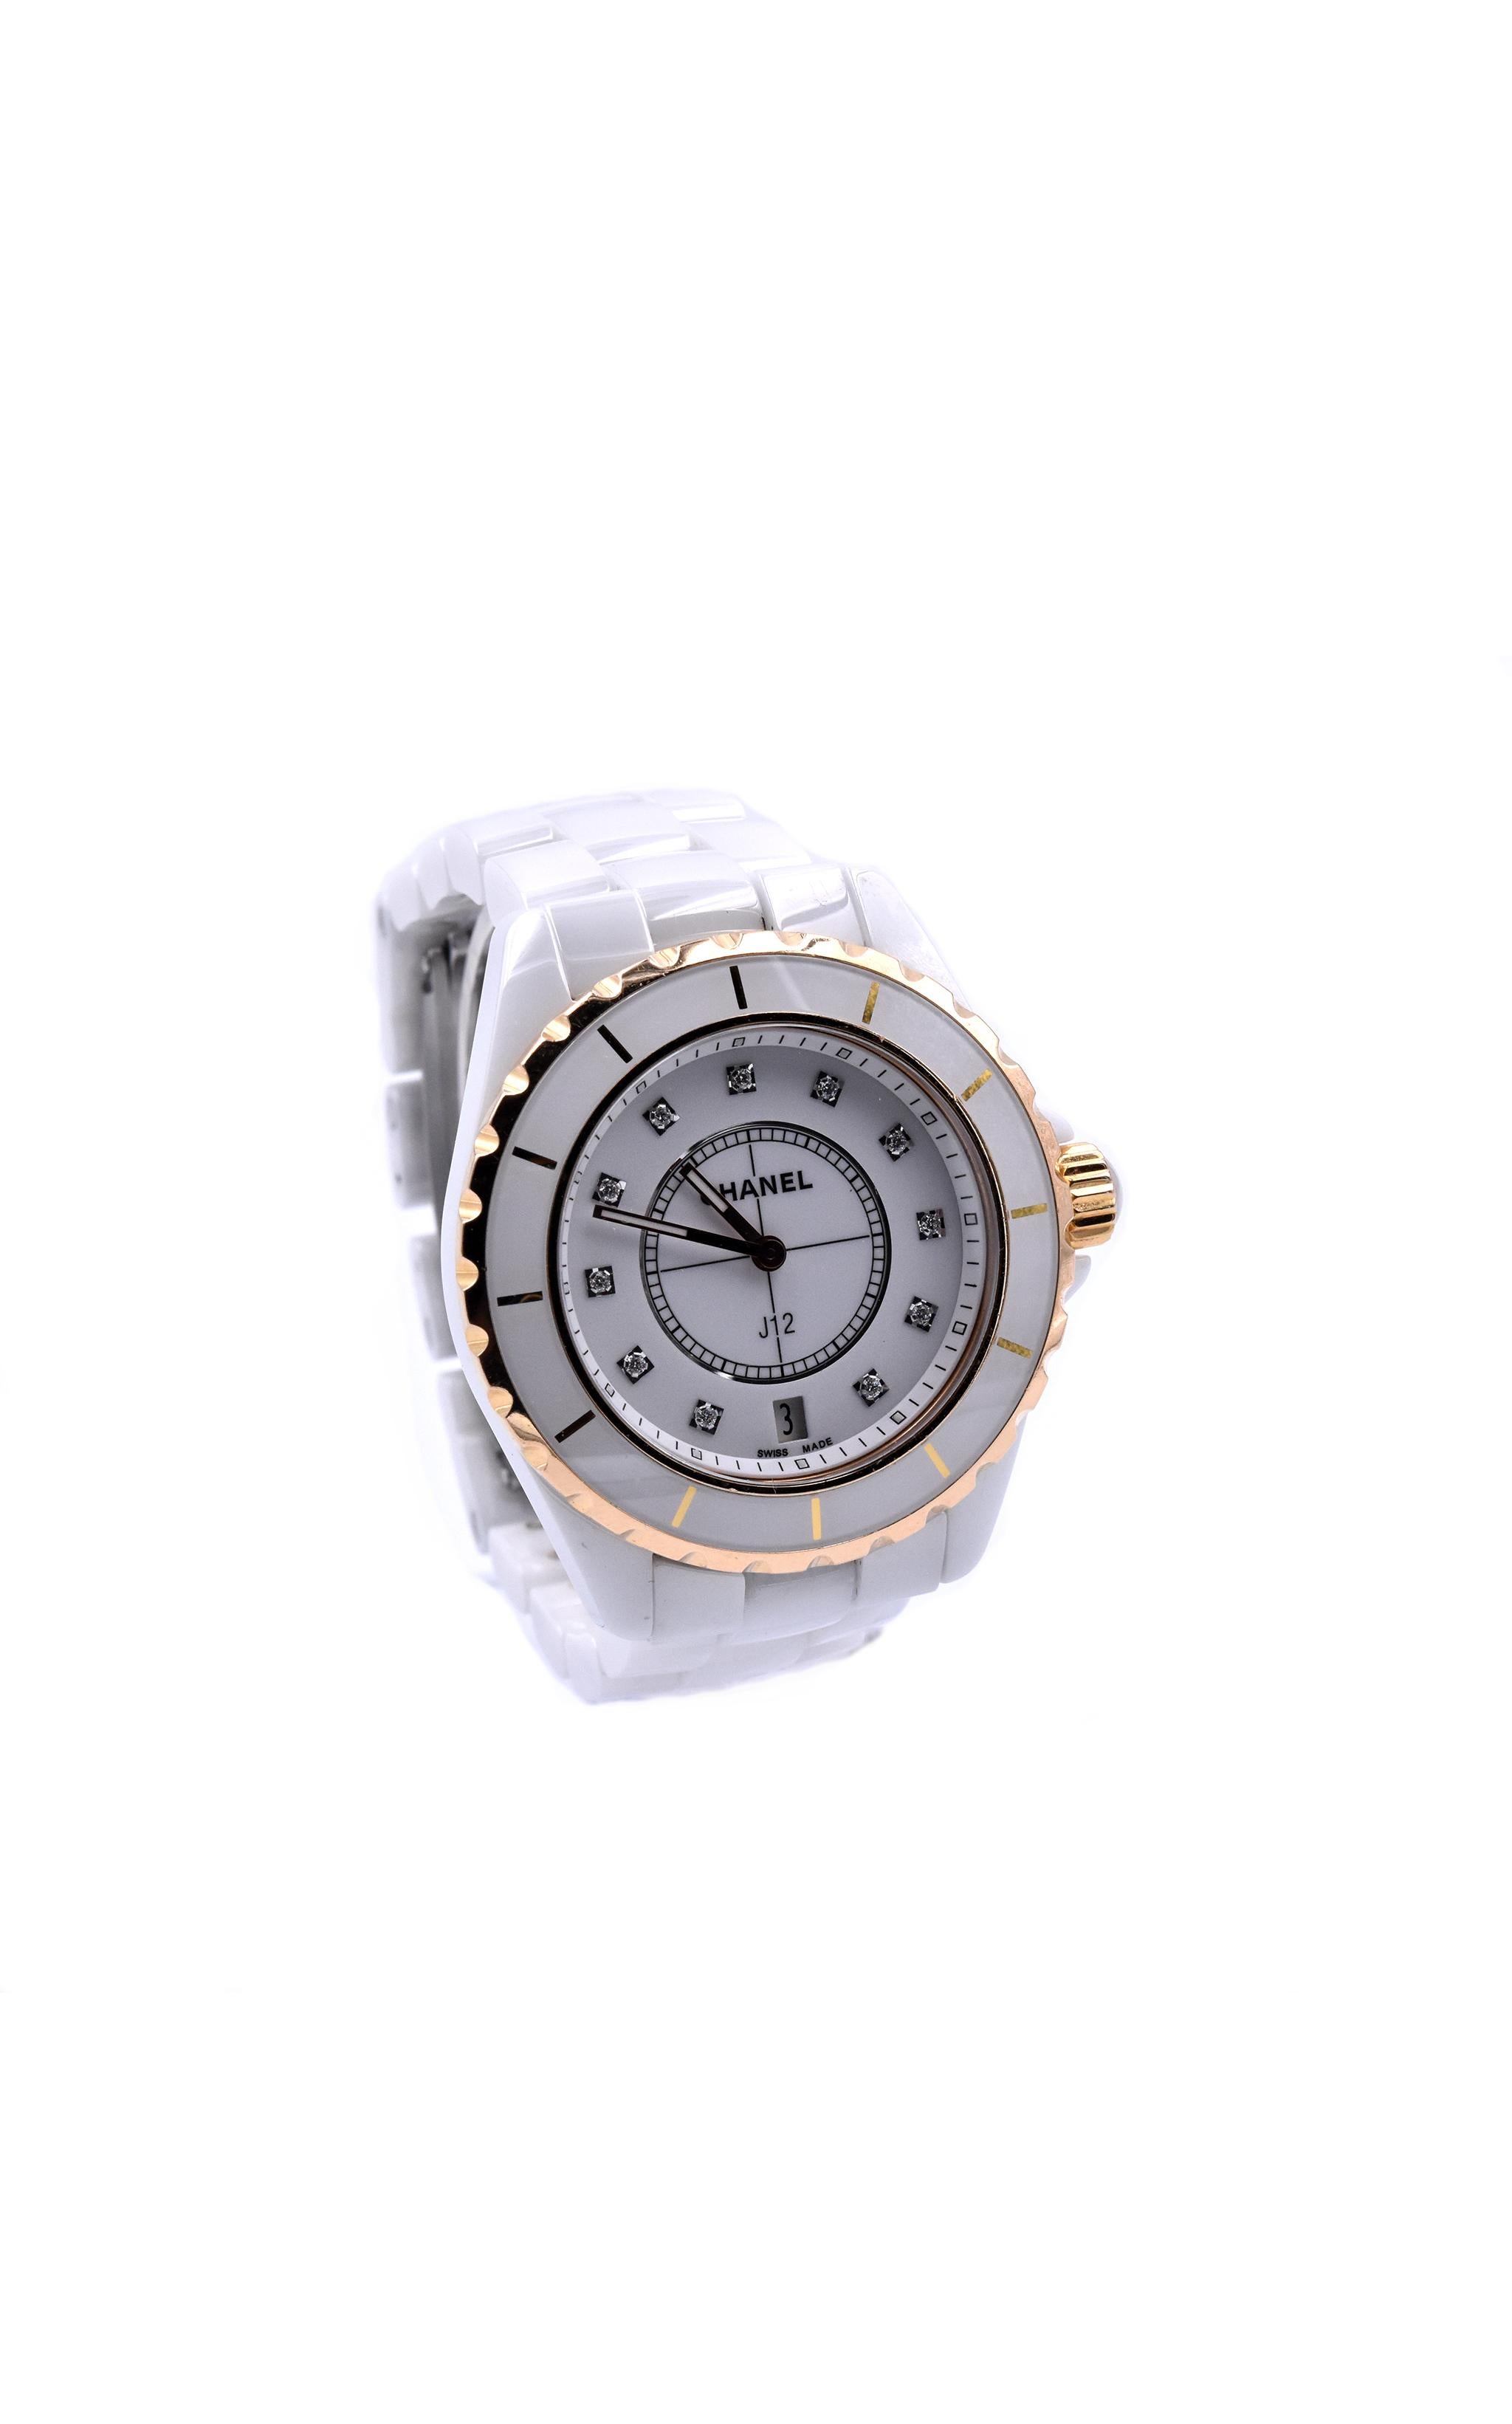 Movement: quartz
Function: hours, minutes, seconds, date between 4-5
Case: 38mm white ceramic case, 18K rose gold ni-directional rotating bezel, sapphire crystal, water resistant to 200 meters
Band: white ceramic bracelet with butterfly clasp
Dial: